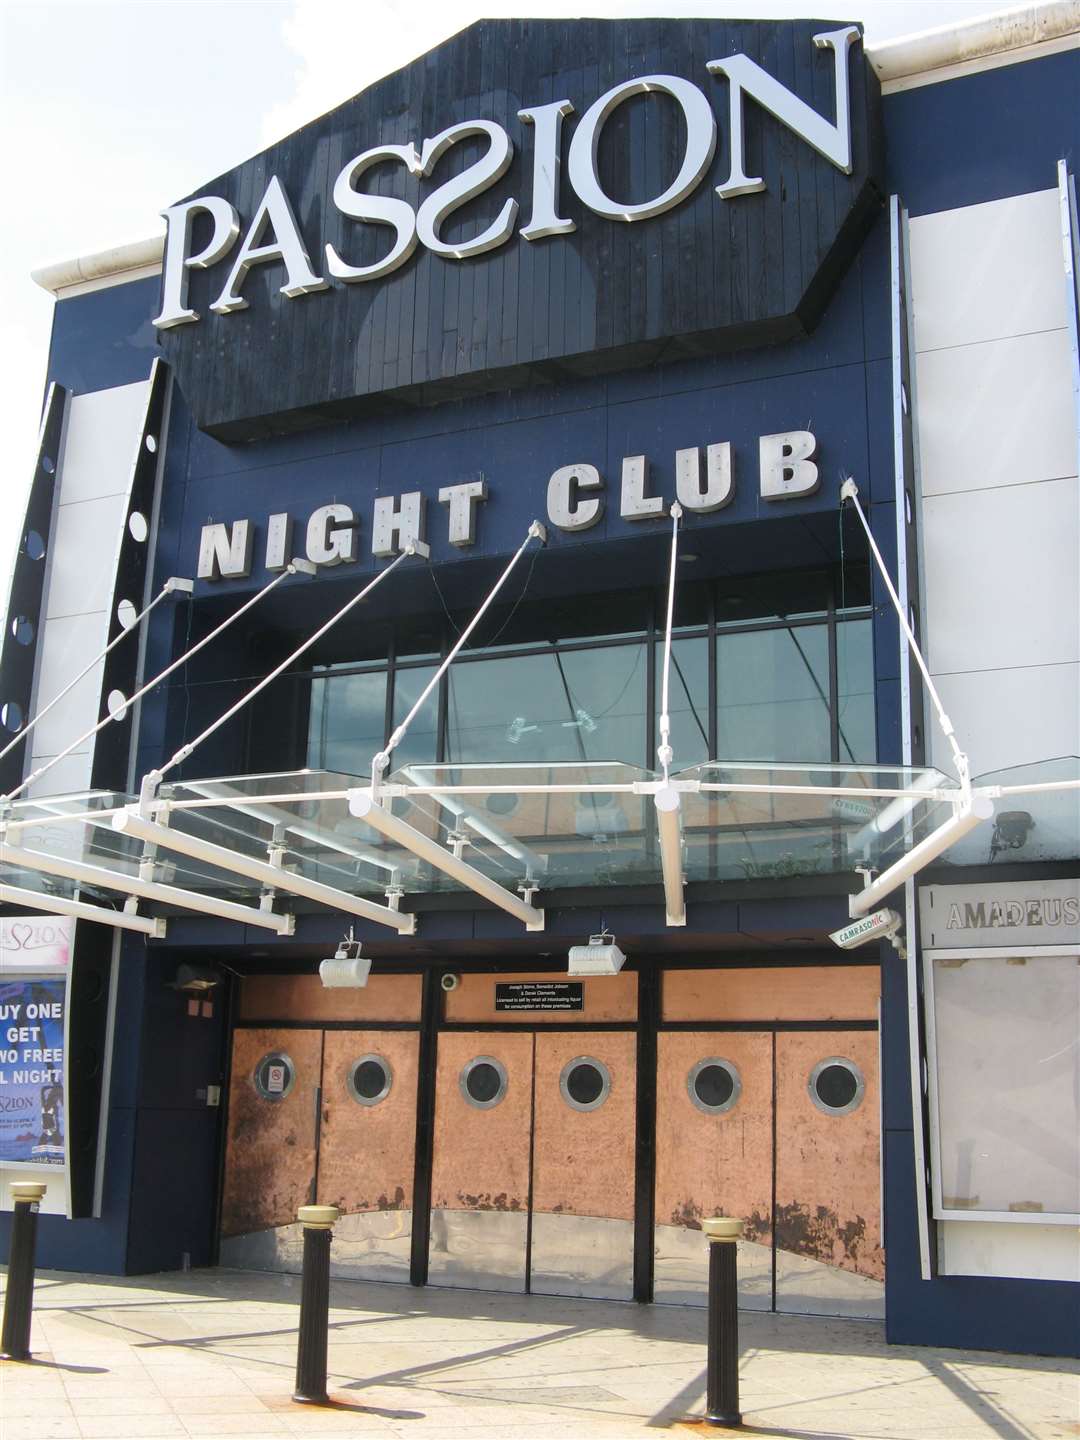 By 2011, the club had been renamed Passion